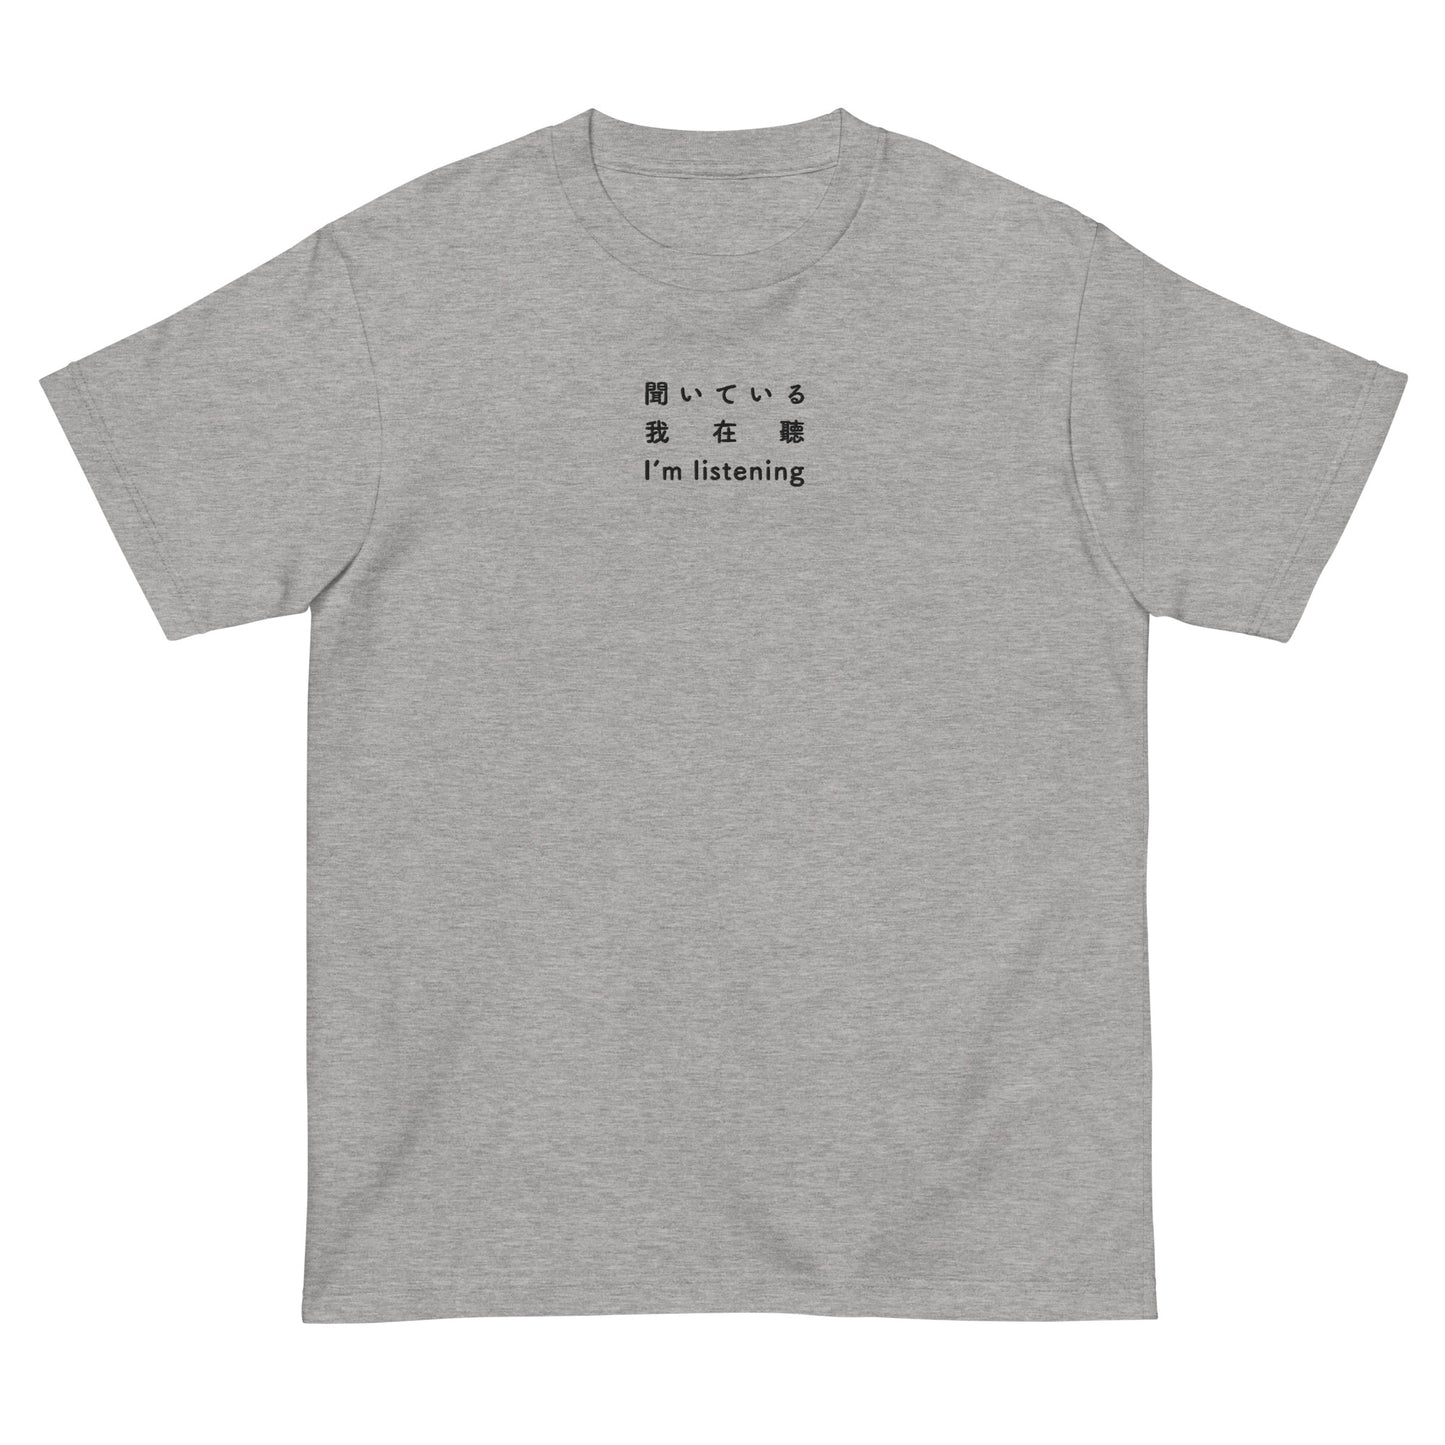 Light Gray High Quality Tee - Front Design with an Black Embroidery "I'm listening" in Japanese,Chinese and English